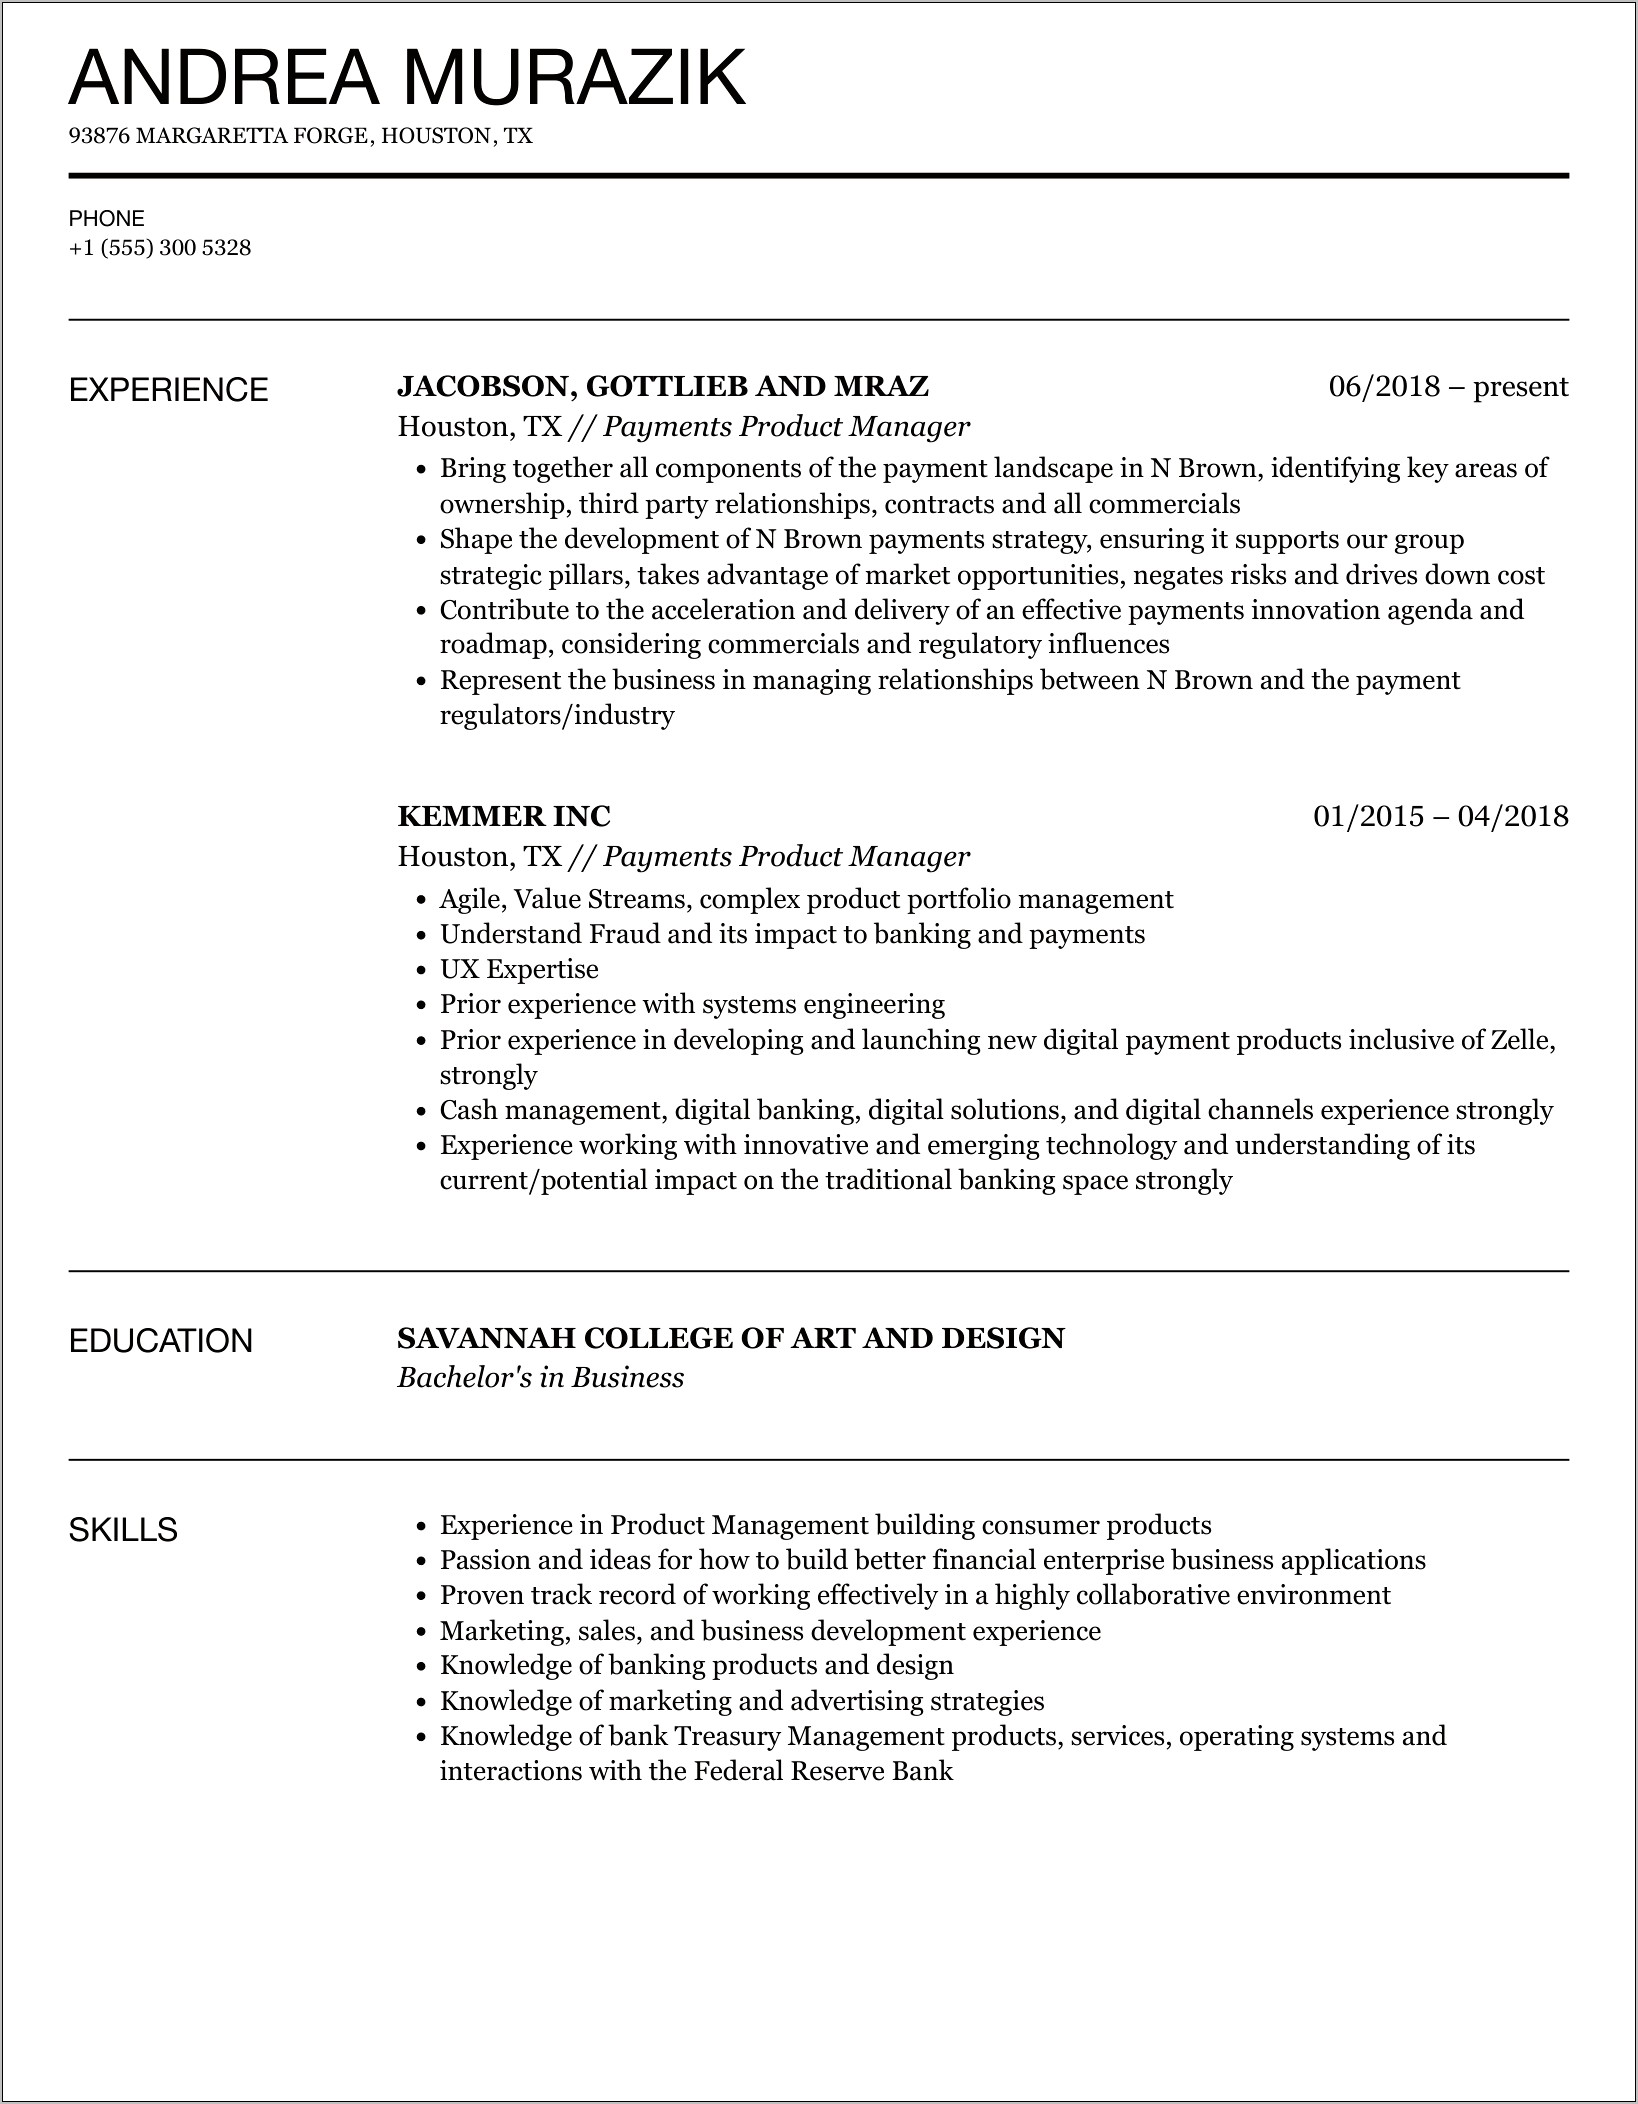 Resume Format For Product Management